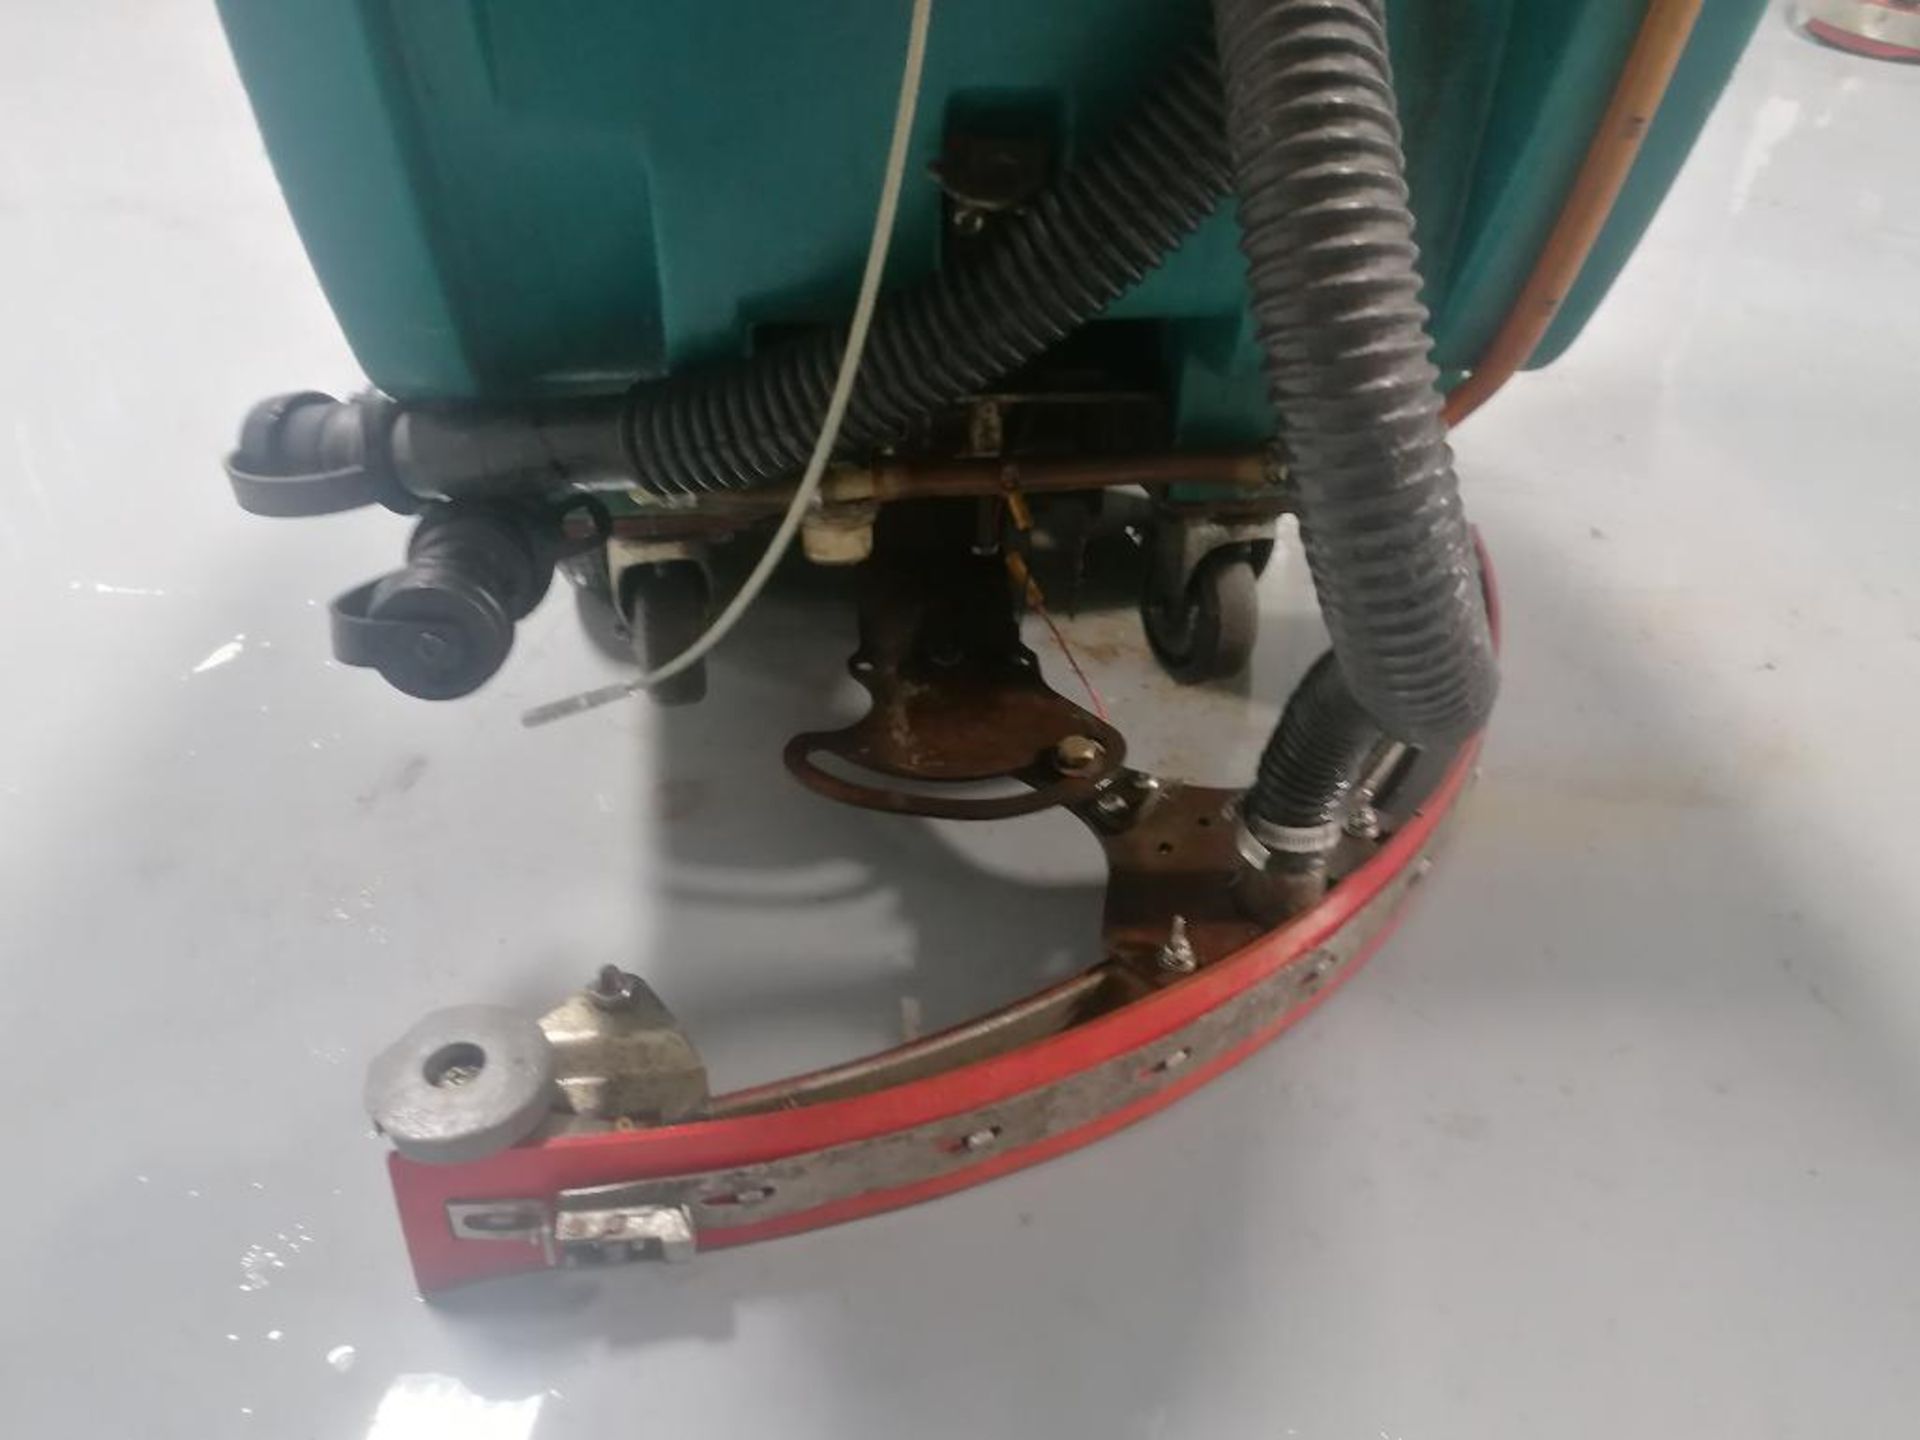 Tennant 5400 Floor Scrubber, Serial #540010203098, 24 Volts. Located in Mt. Pleasant, IA. - Image 15 of 17